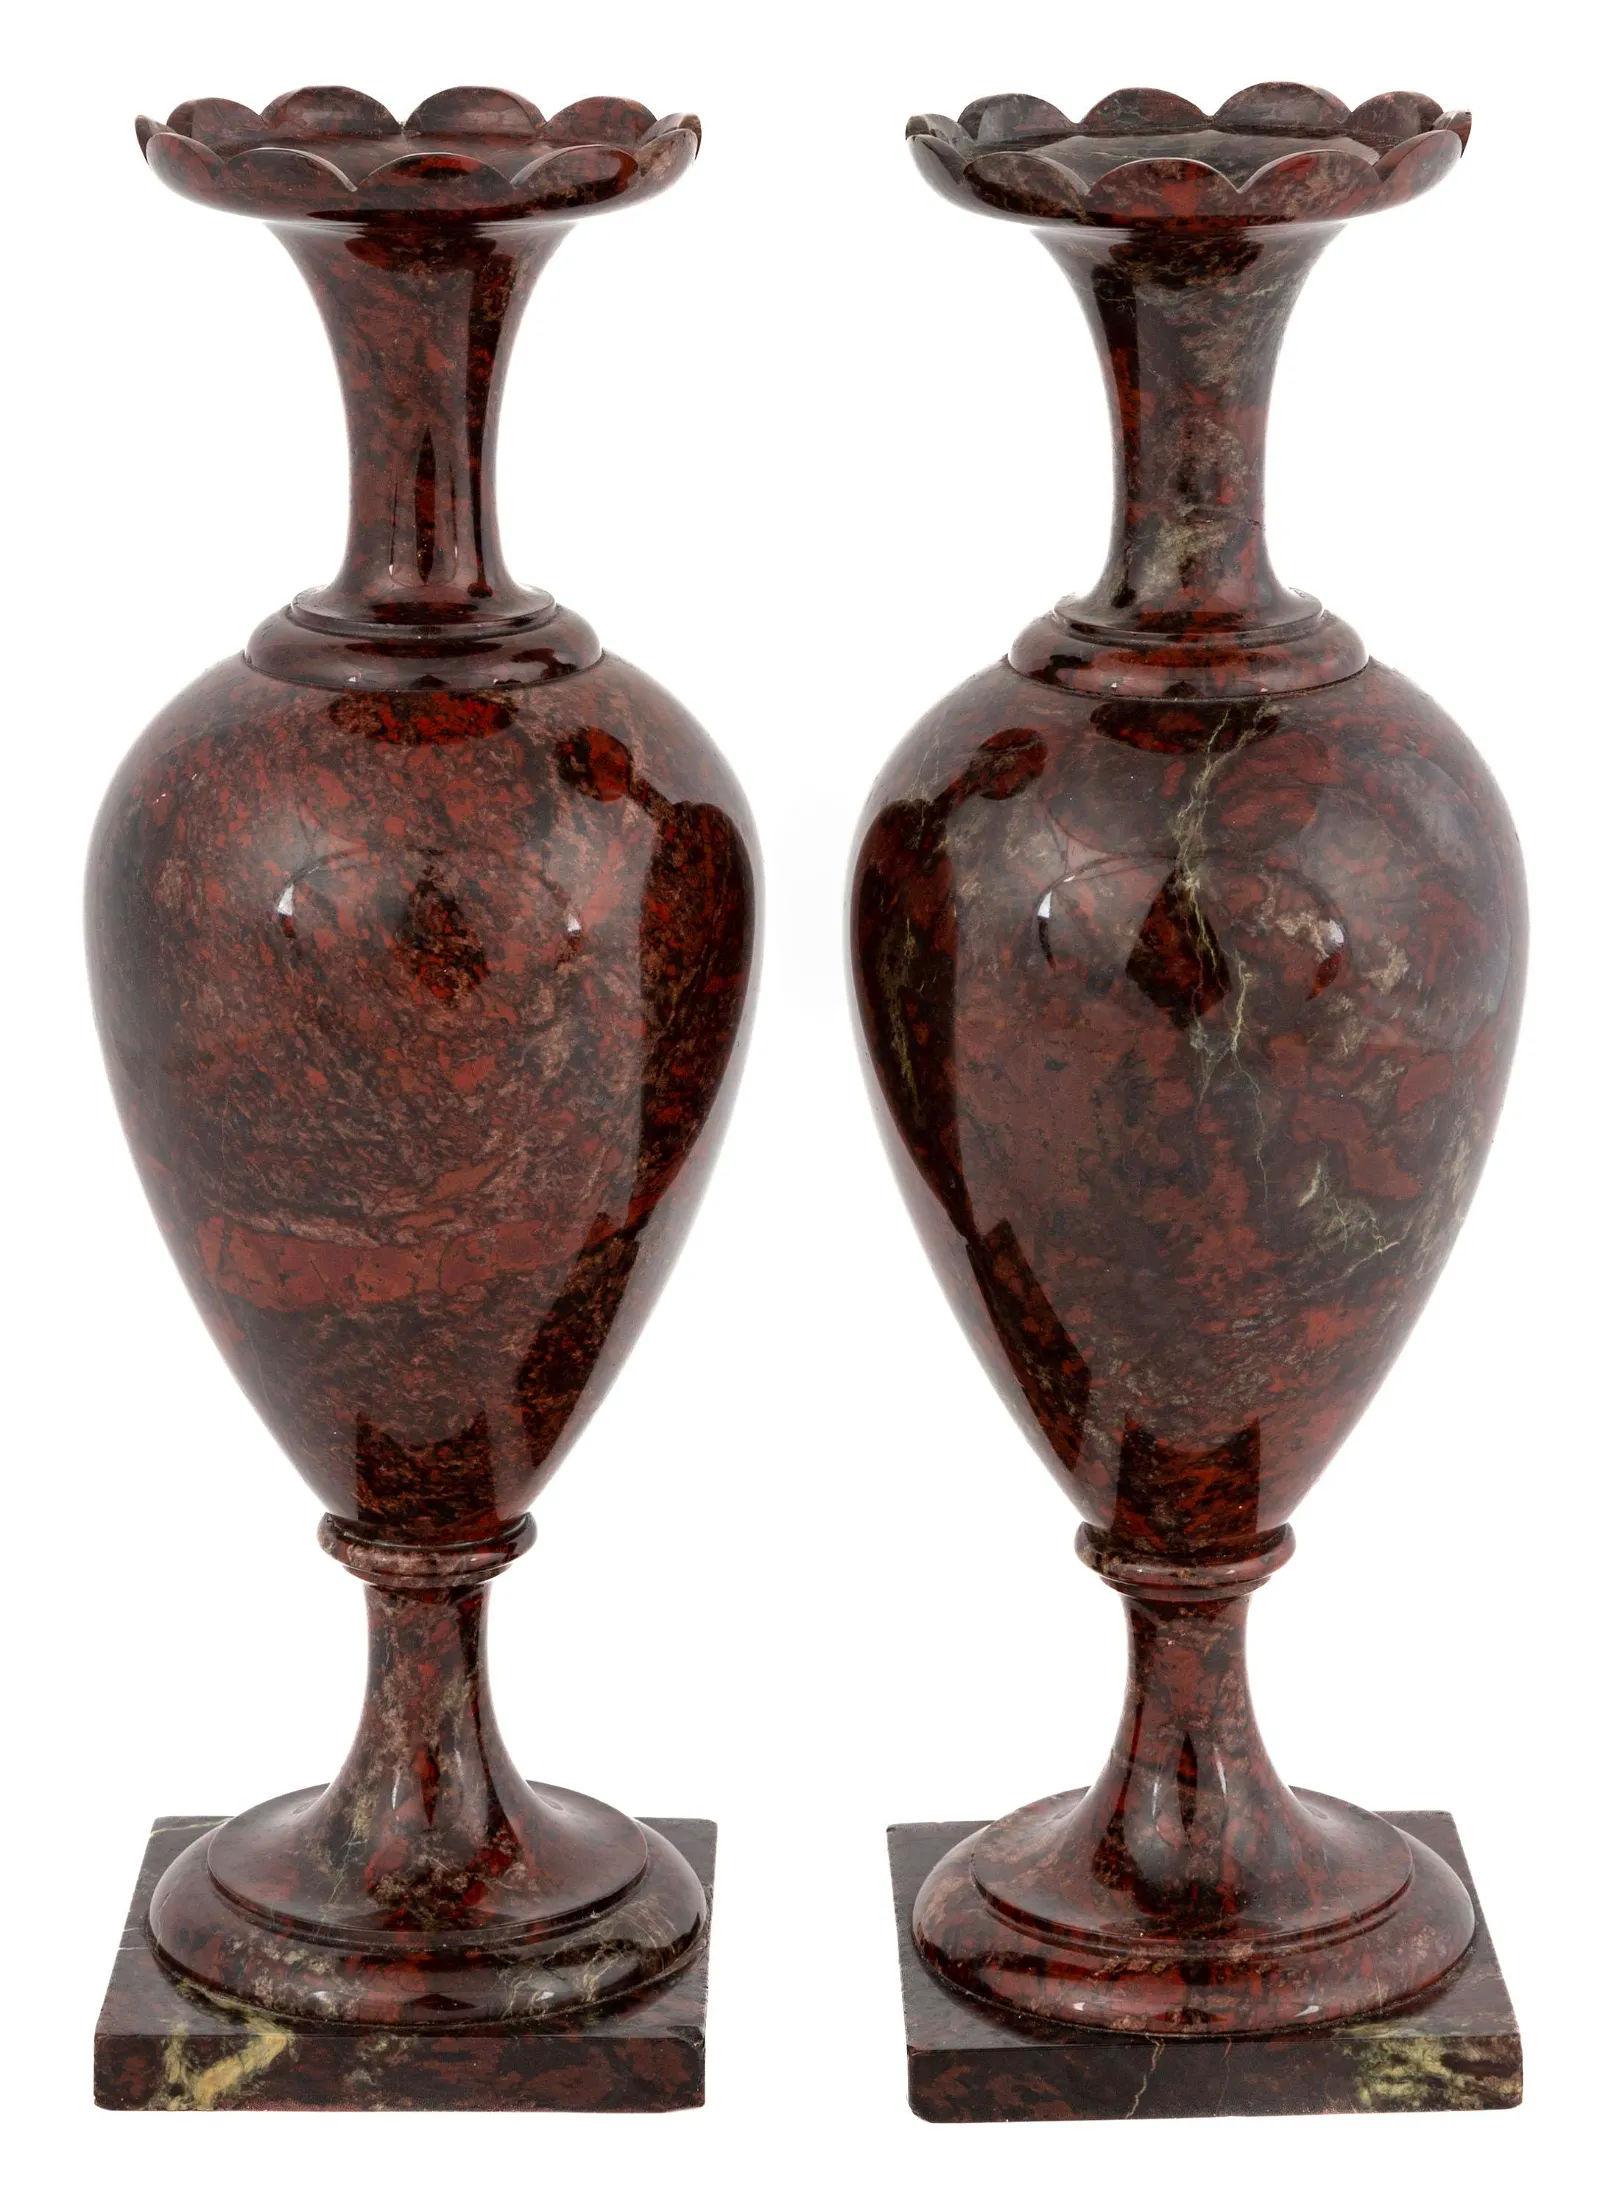 Our pair of antique vases are carved from reddish brown jasper stone and date from the late nineteenth century. In good condition with scratches and small chip losses at the bases.